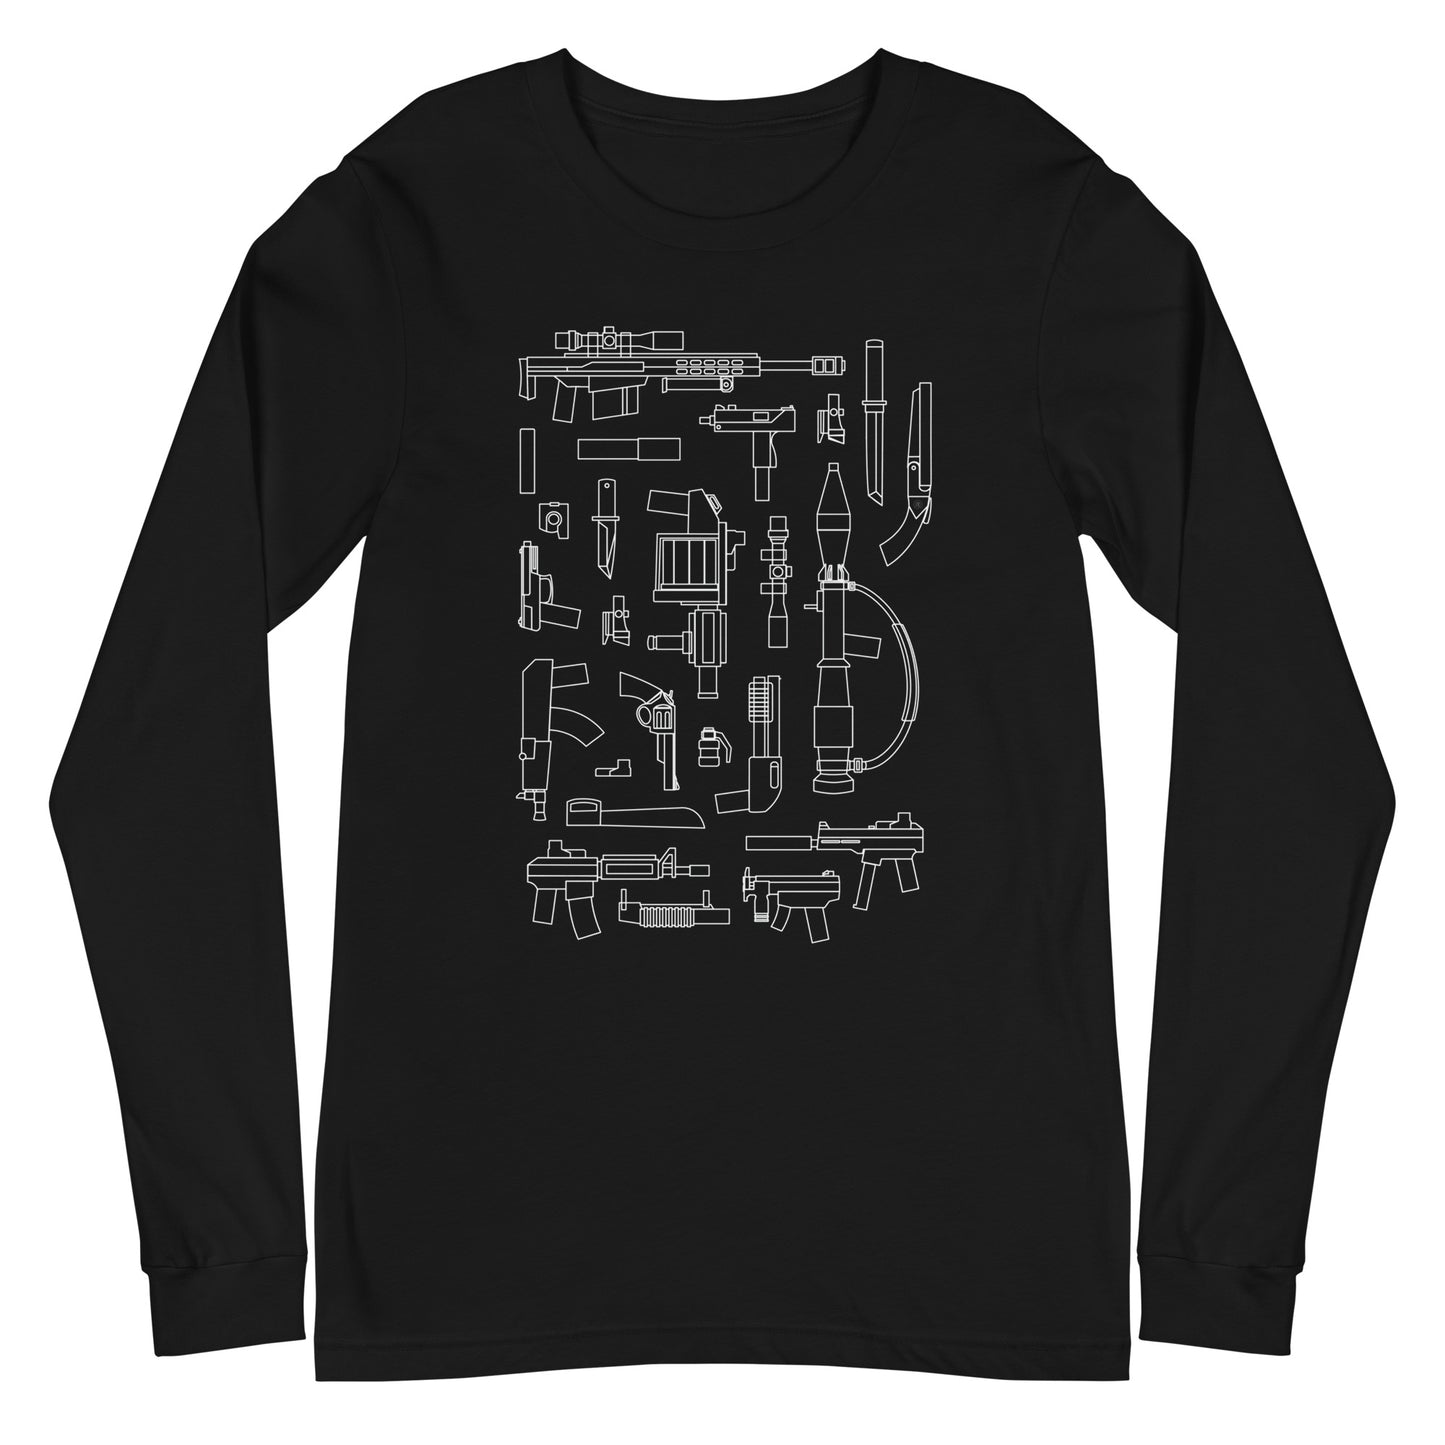 SQUADT WEAPS Long Sleeve Tee